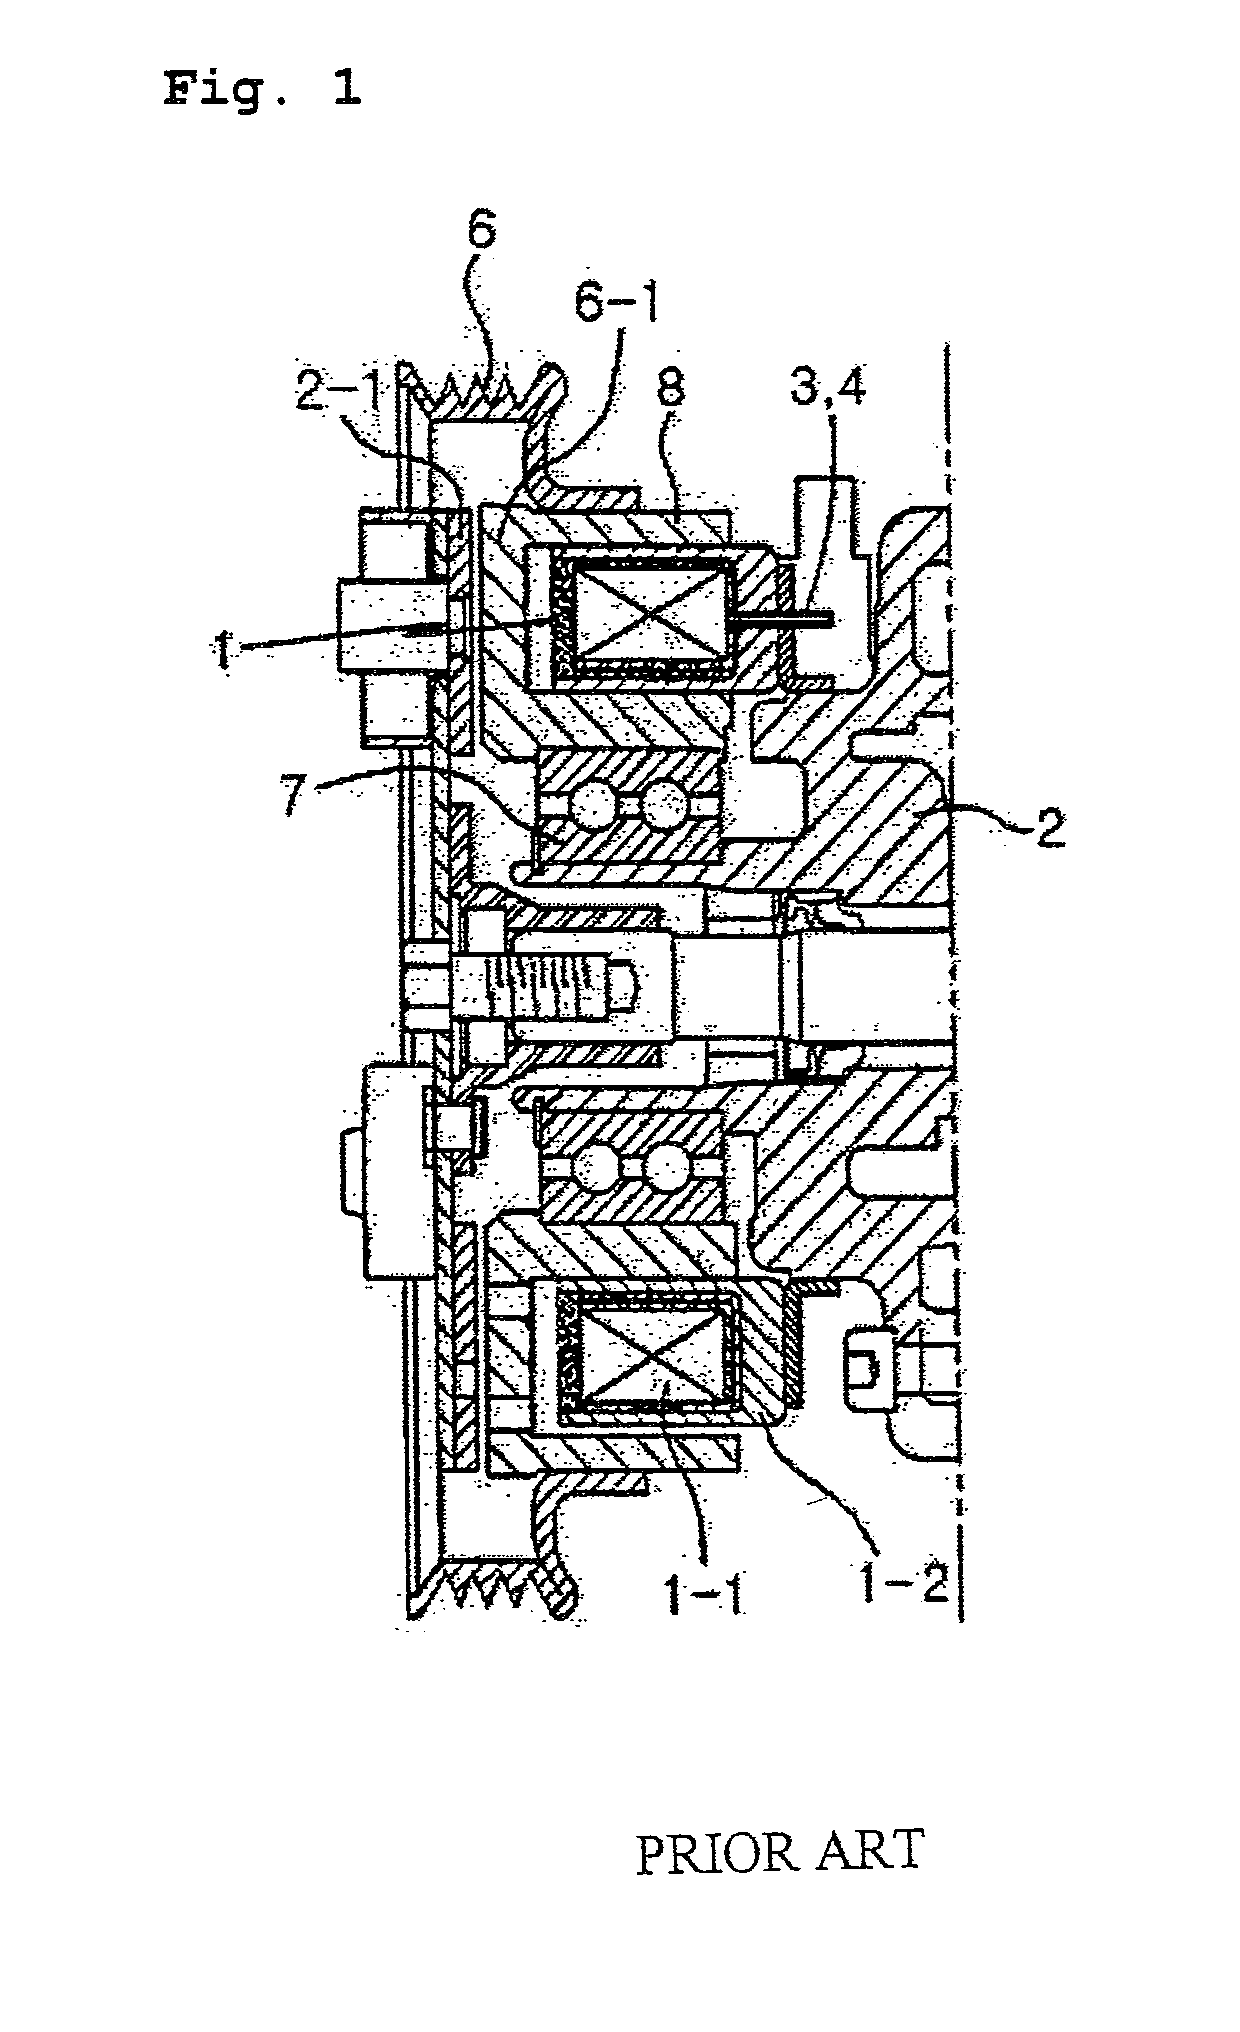 Electric power connection part of electromagnetic clutch field coil assembly